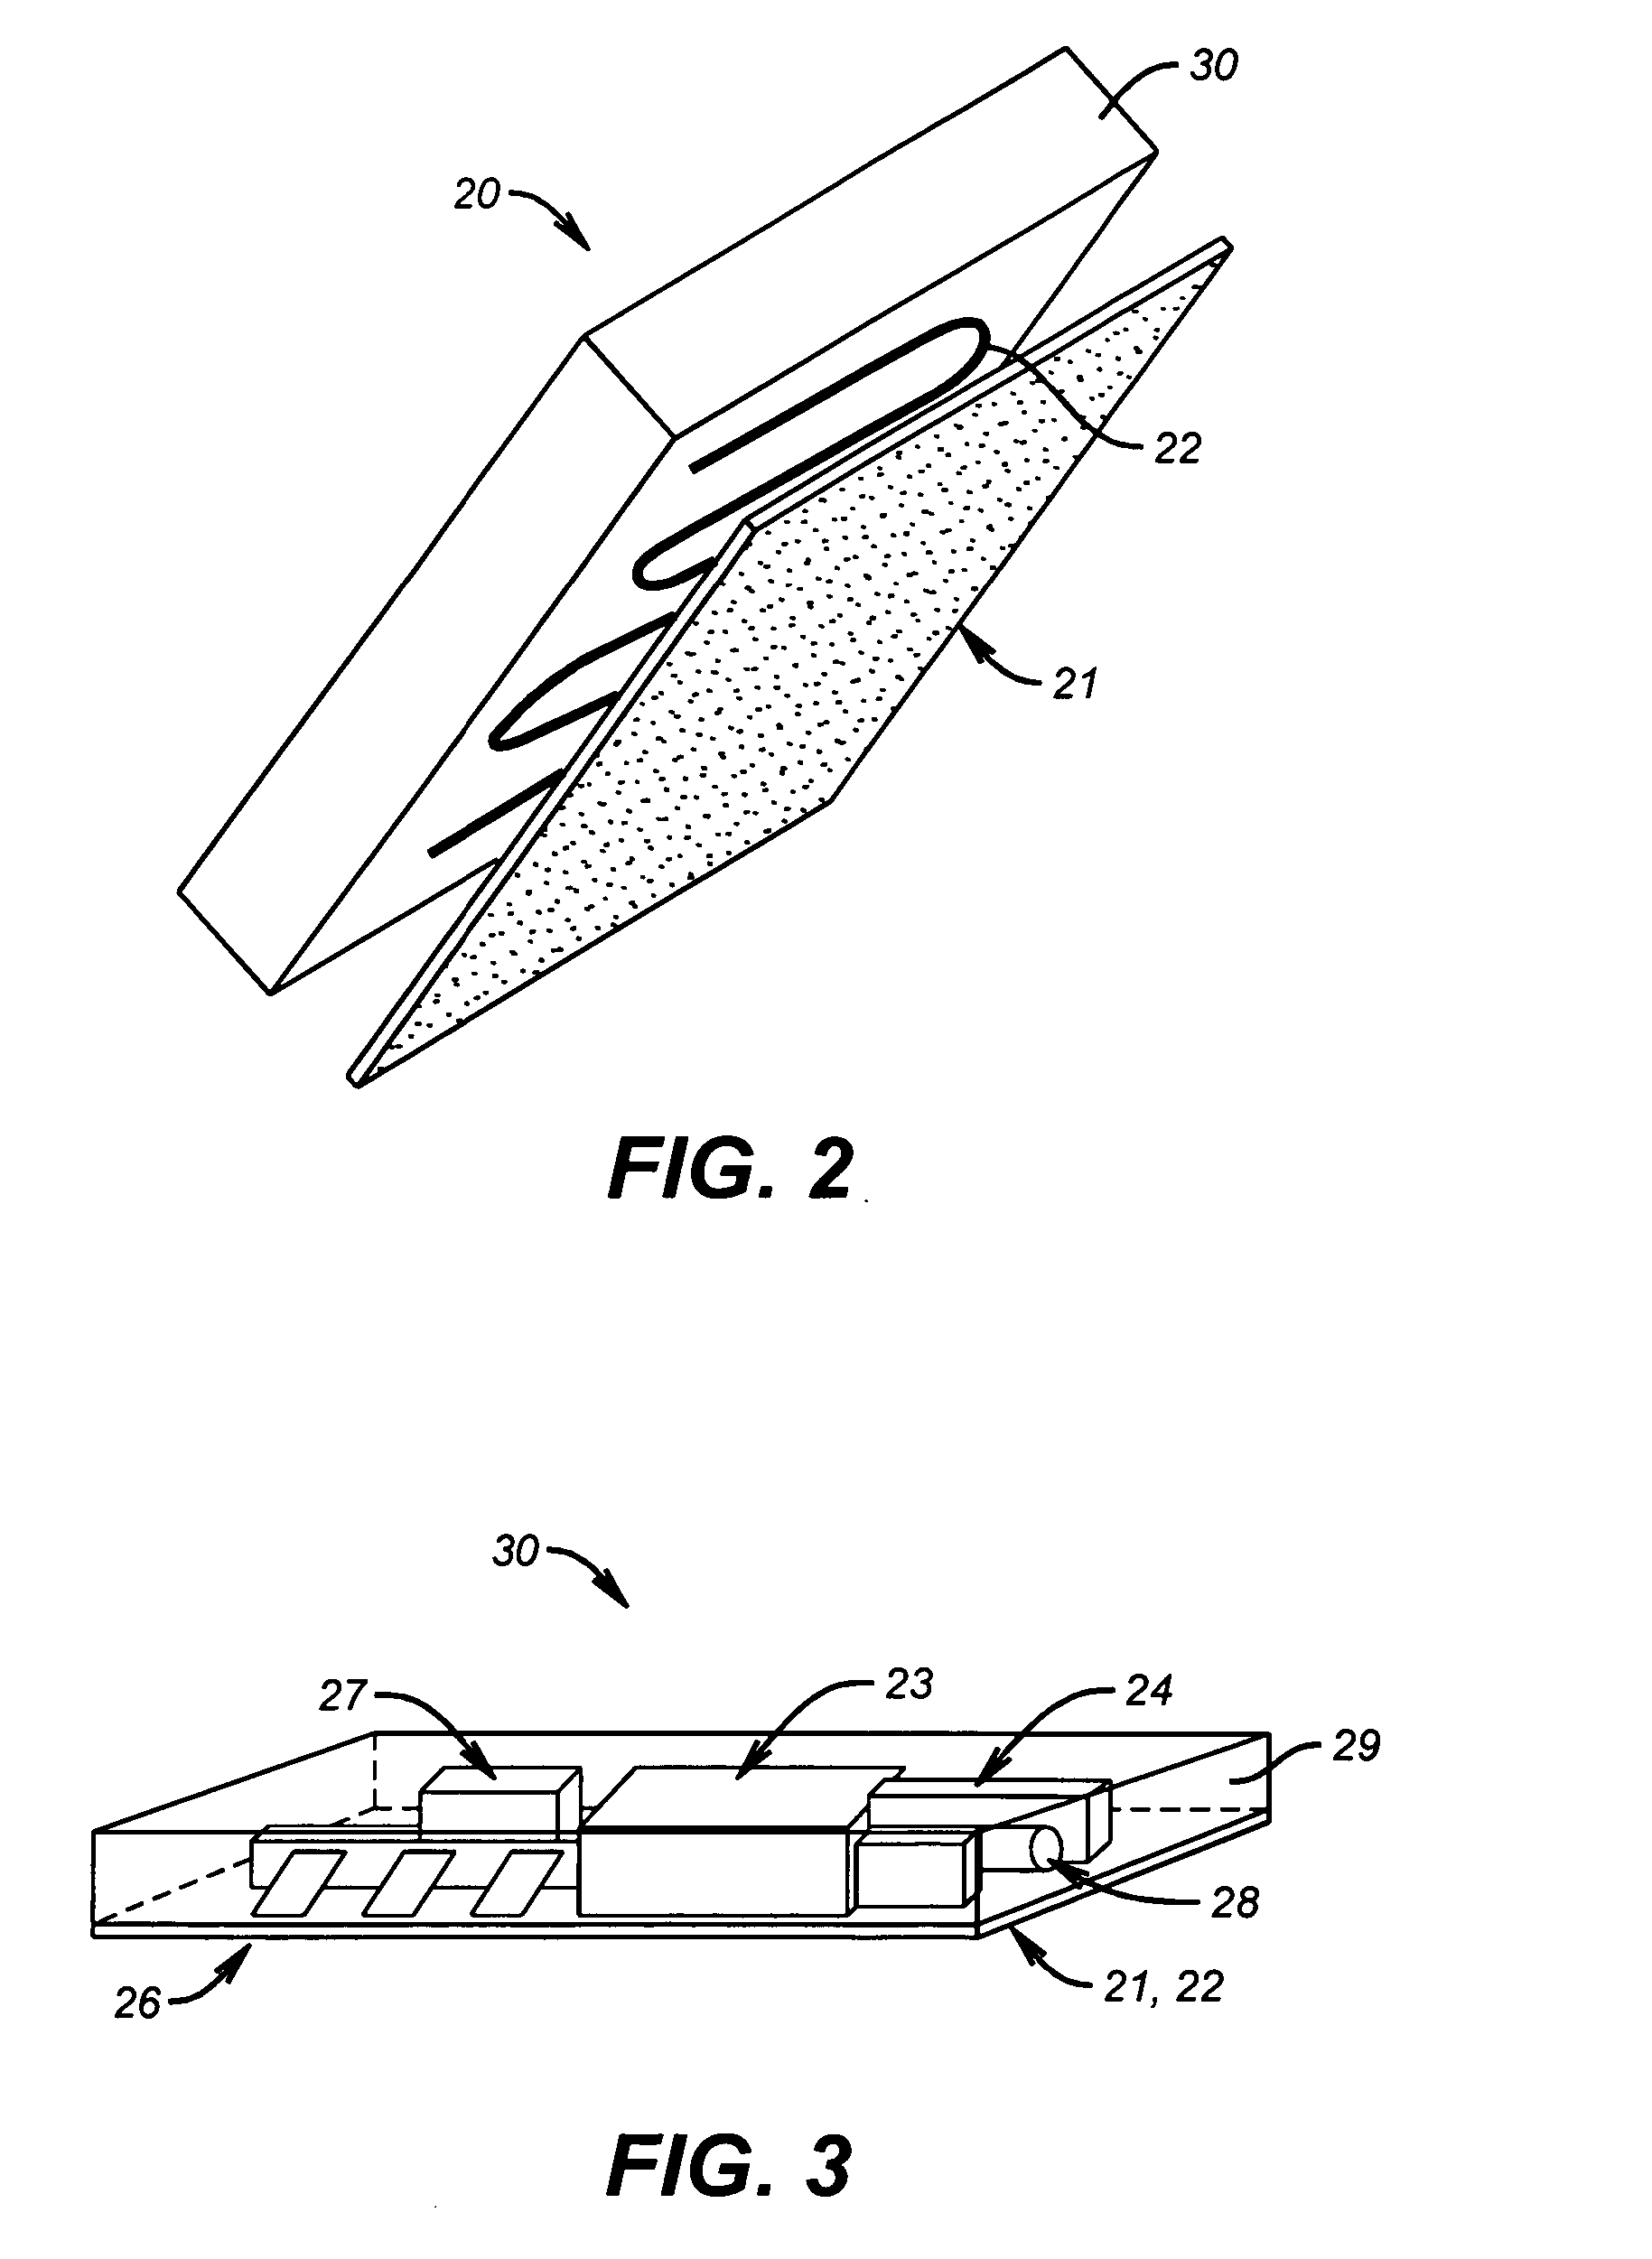 Apparatus and methods for monitoring pipelines